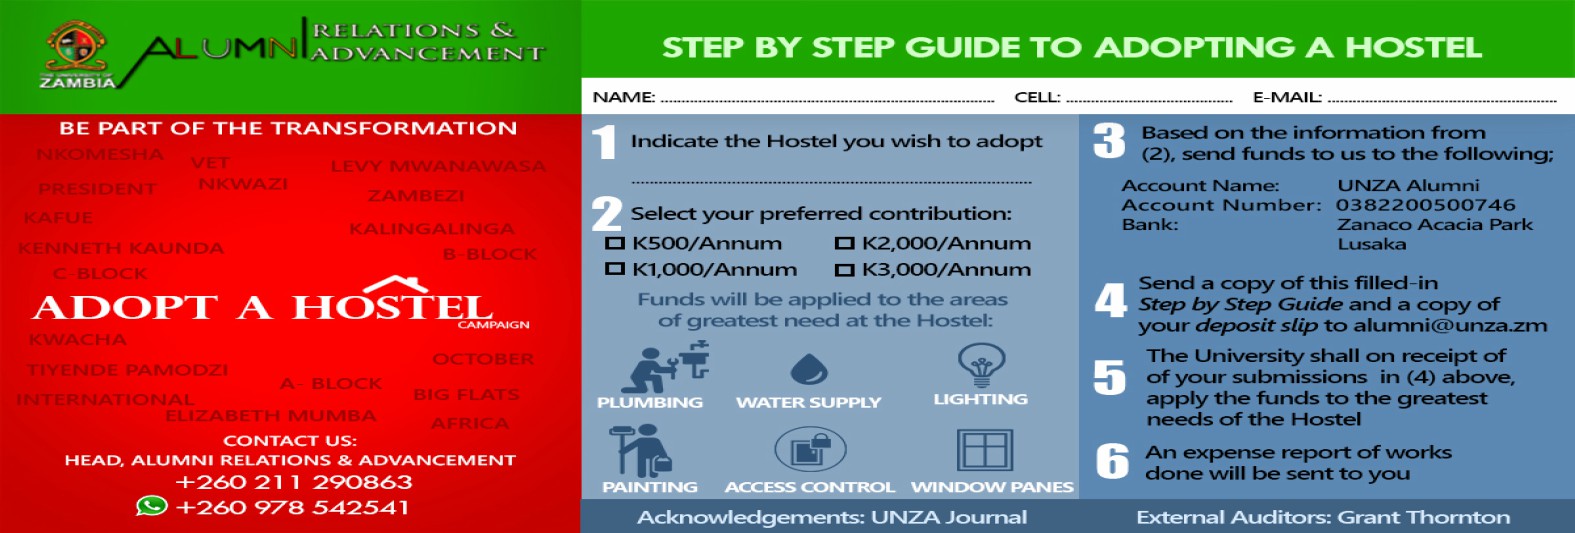 Step by Step Guide to Adopting a Hostel at UNZA